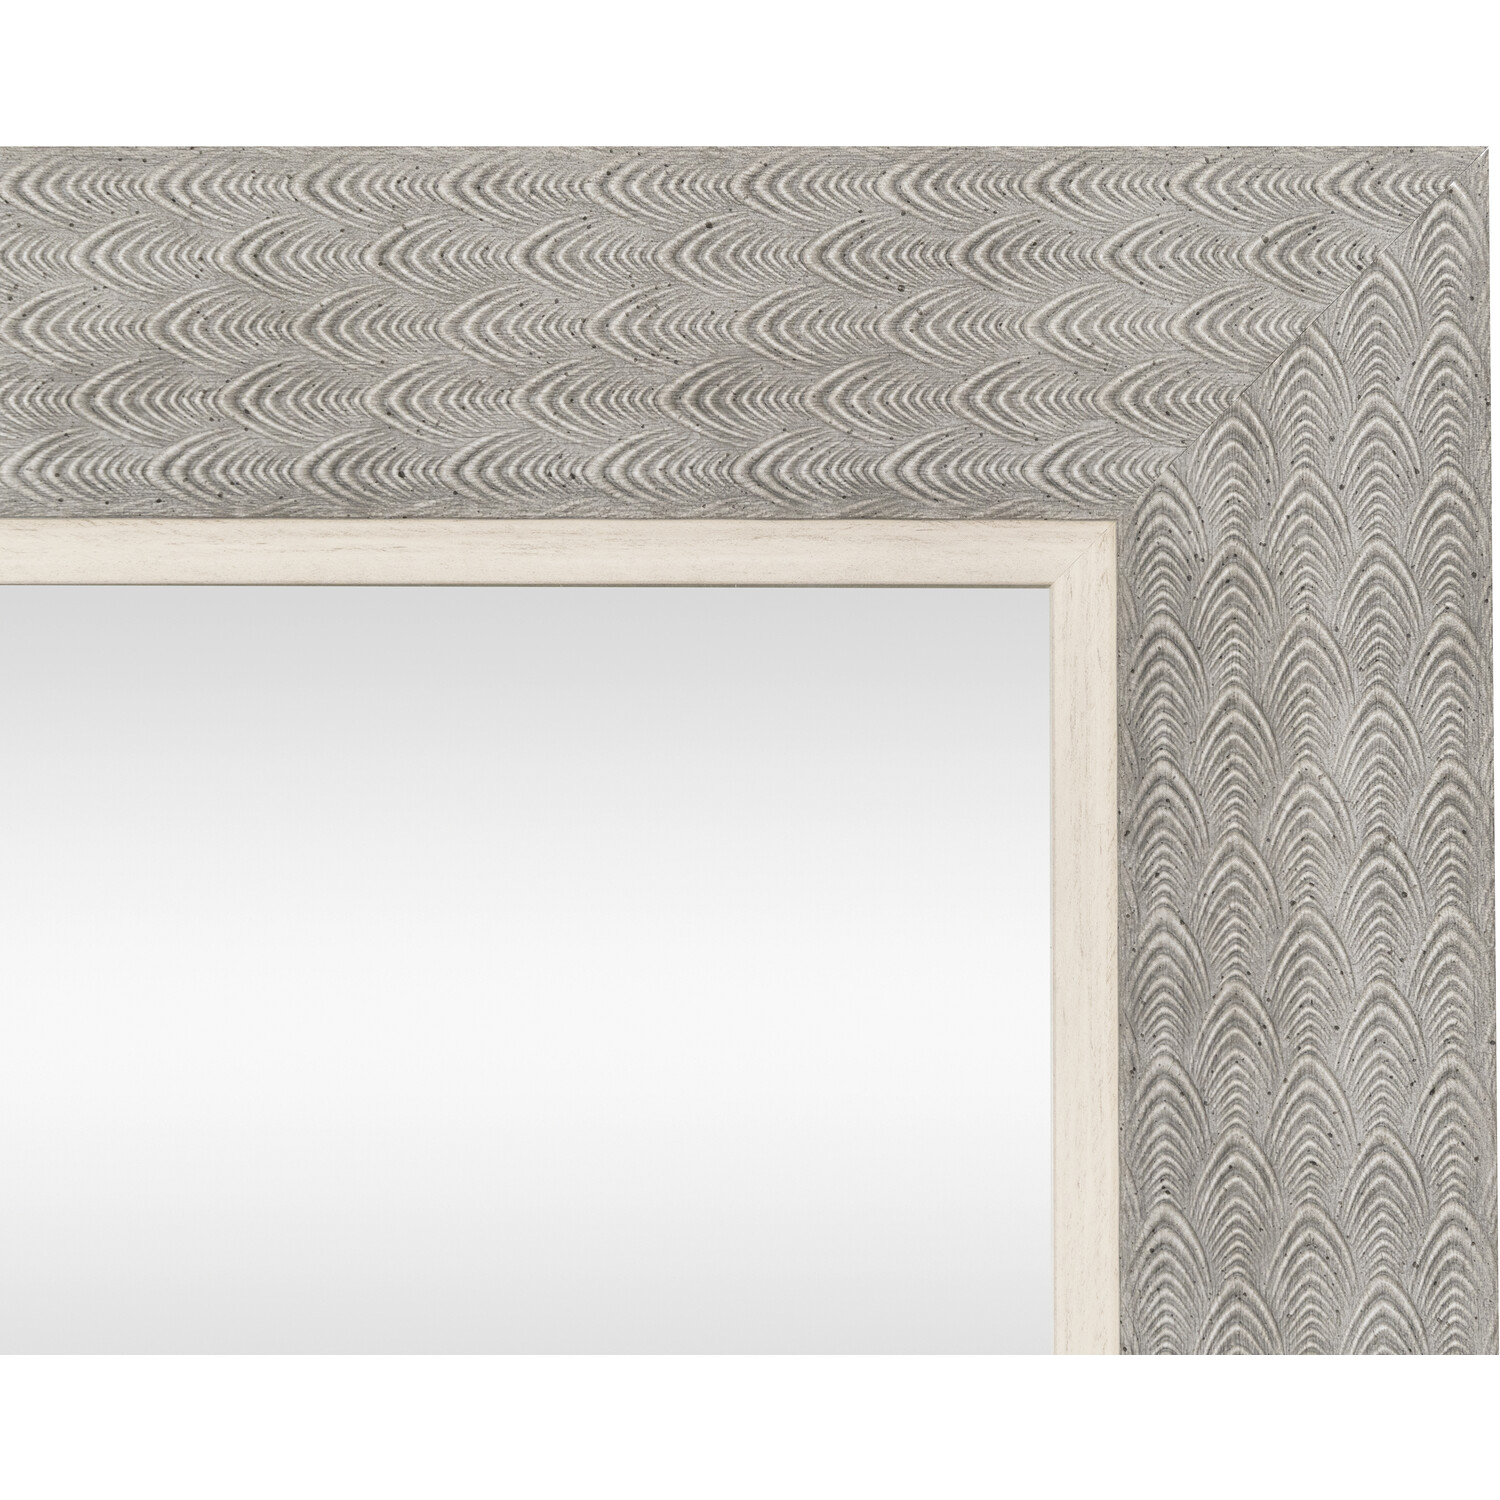 Talia Etched Effect Mirror - Grey Image 4